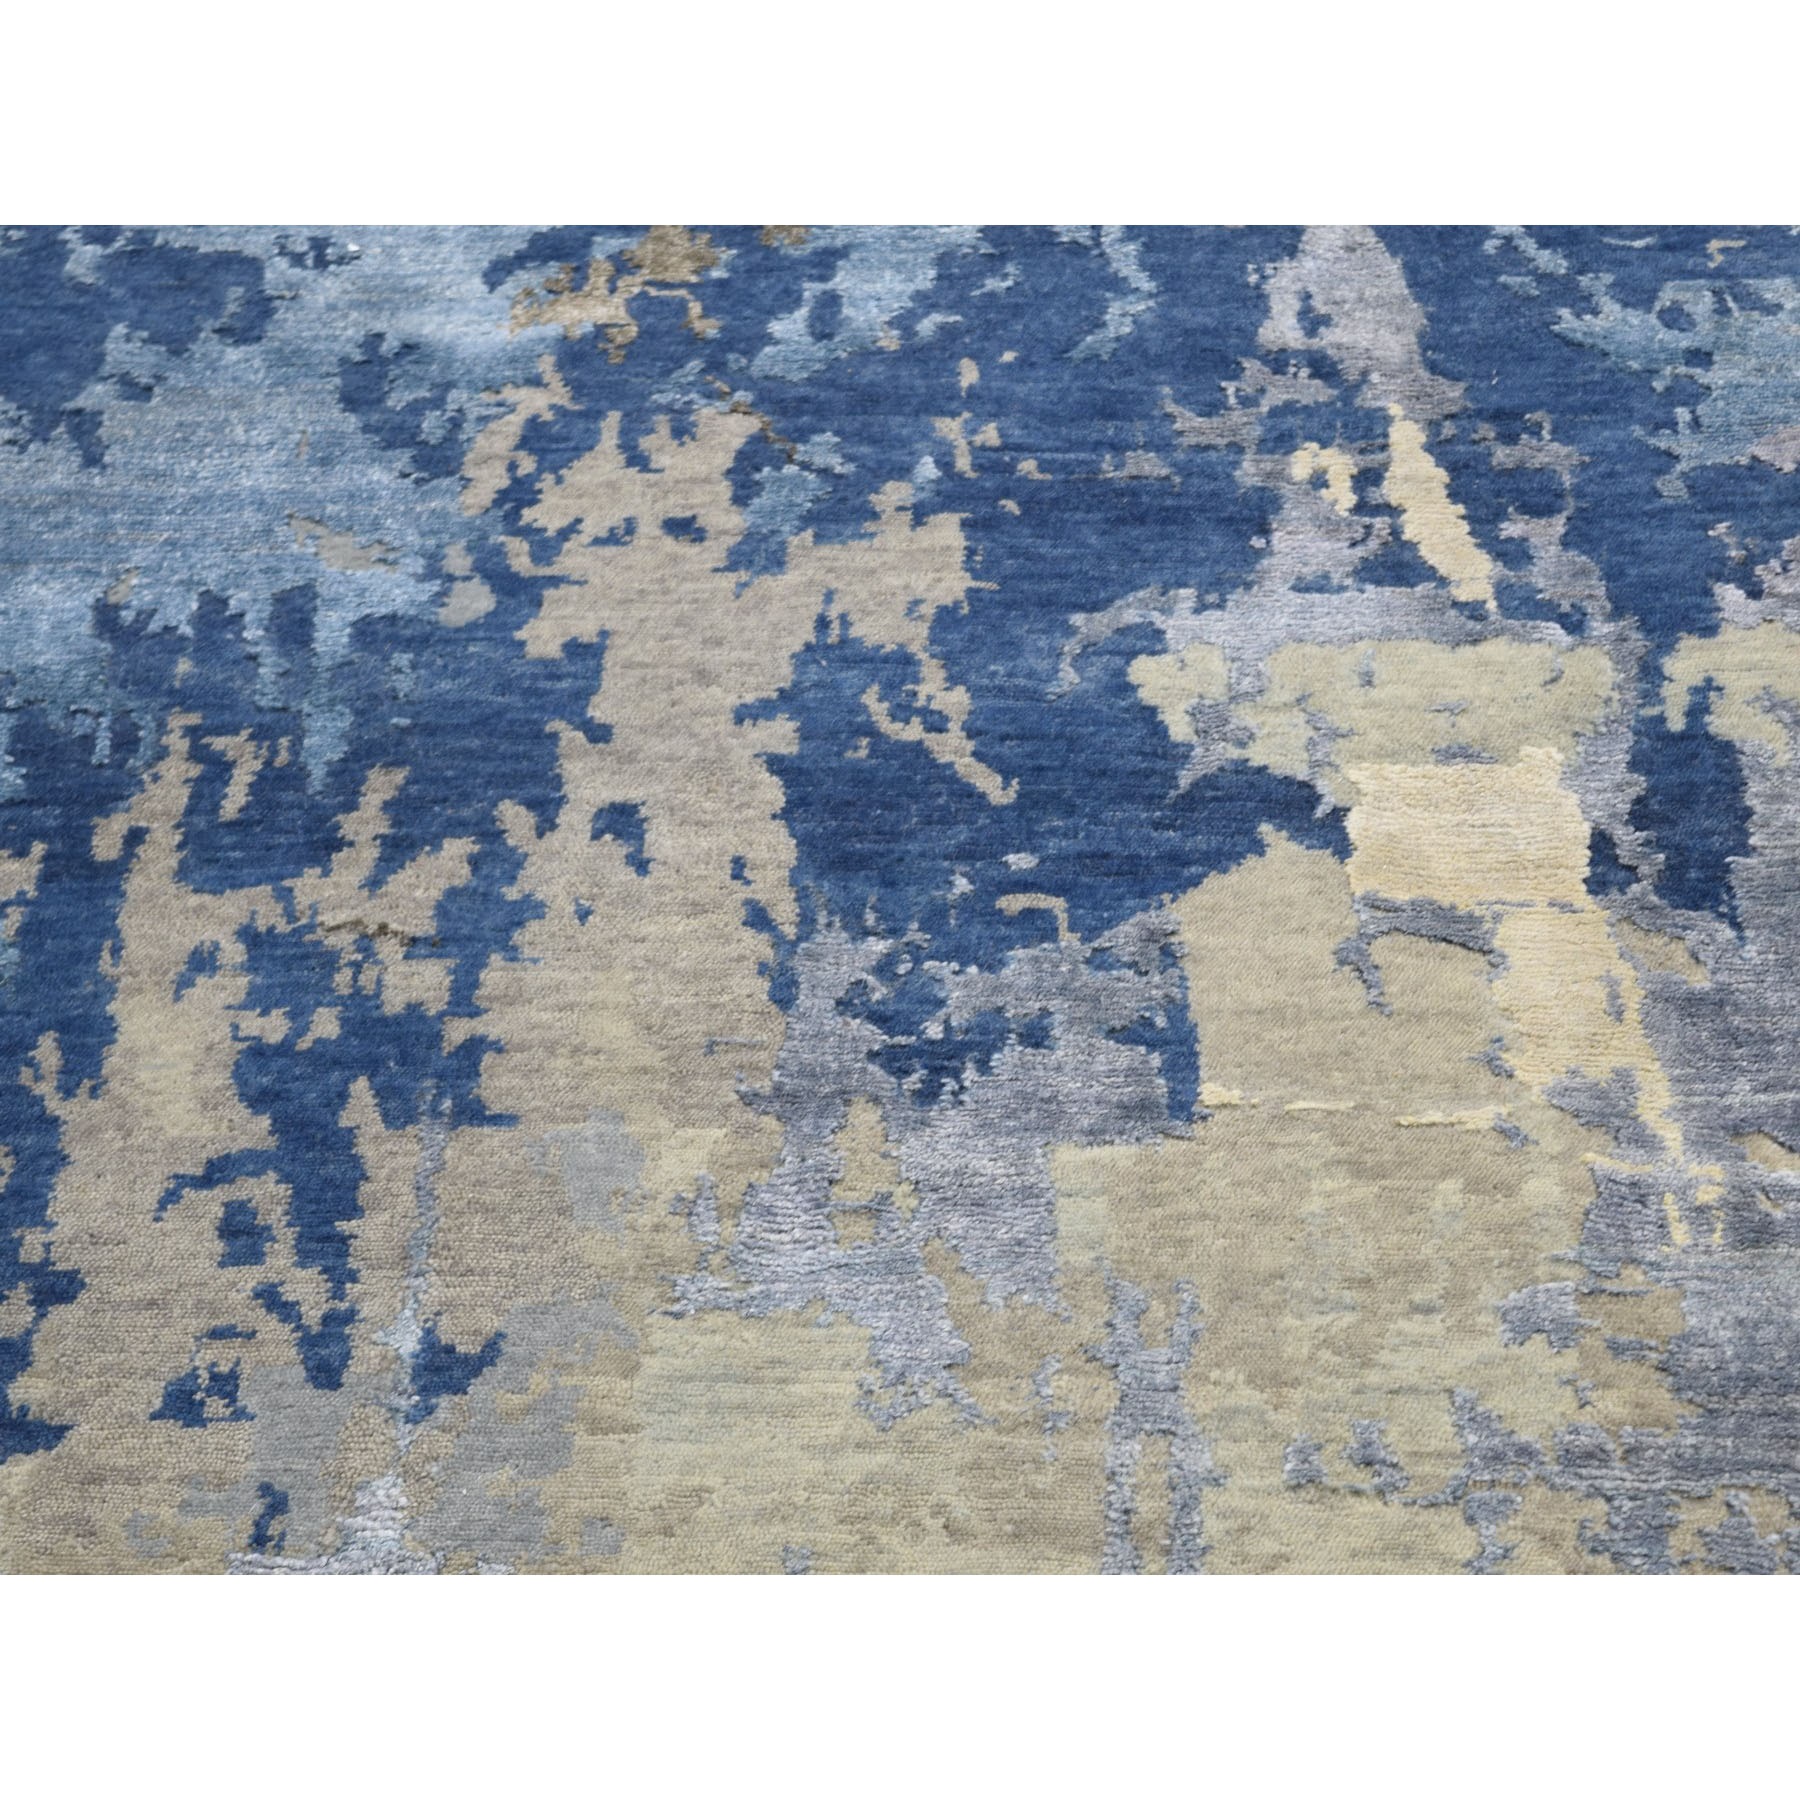 10-1 x13-9  Blue Abstract Design Wool and Silk Hi-Low Pile Hand Knotted Oriental Rug 